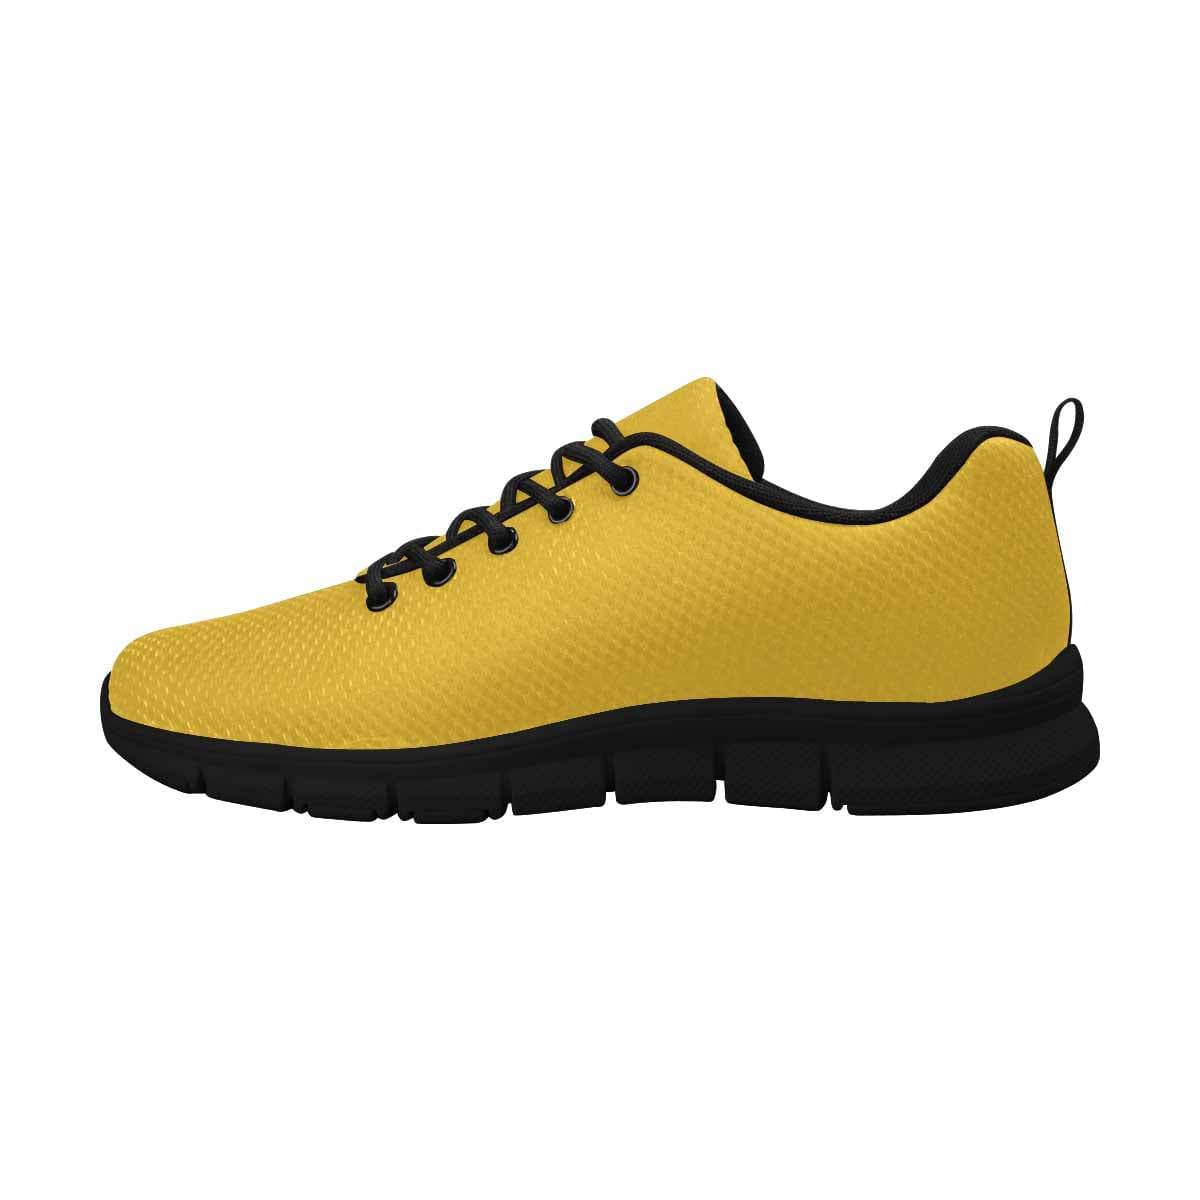 Sneakers For Men Freesia Yellow - Running Shoes - Mens | Sneakers | Running